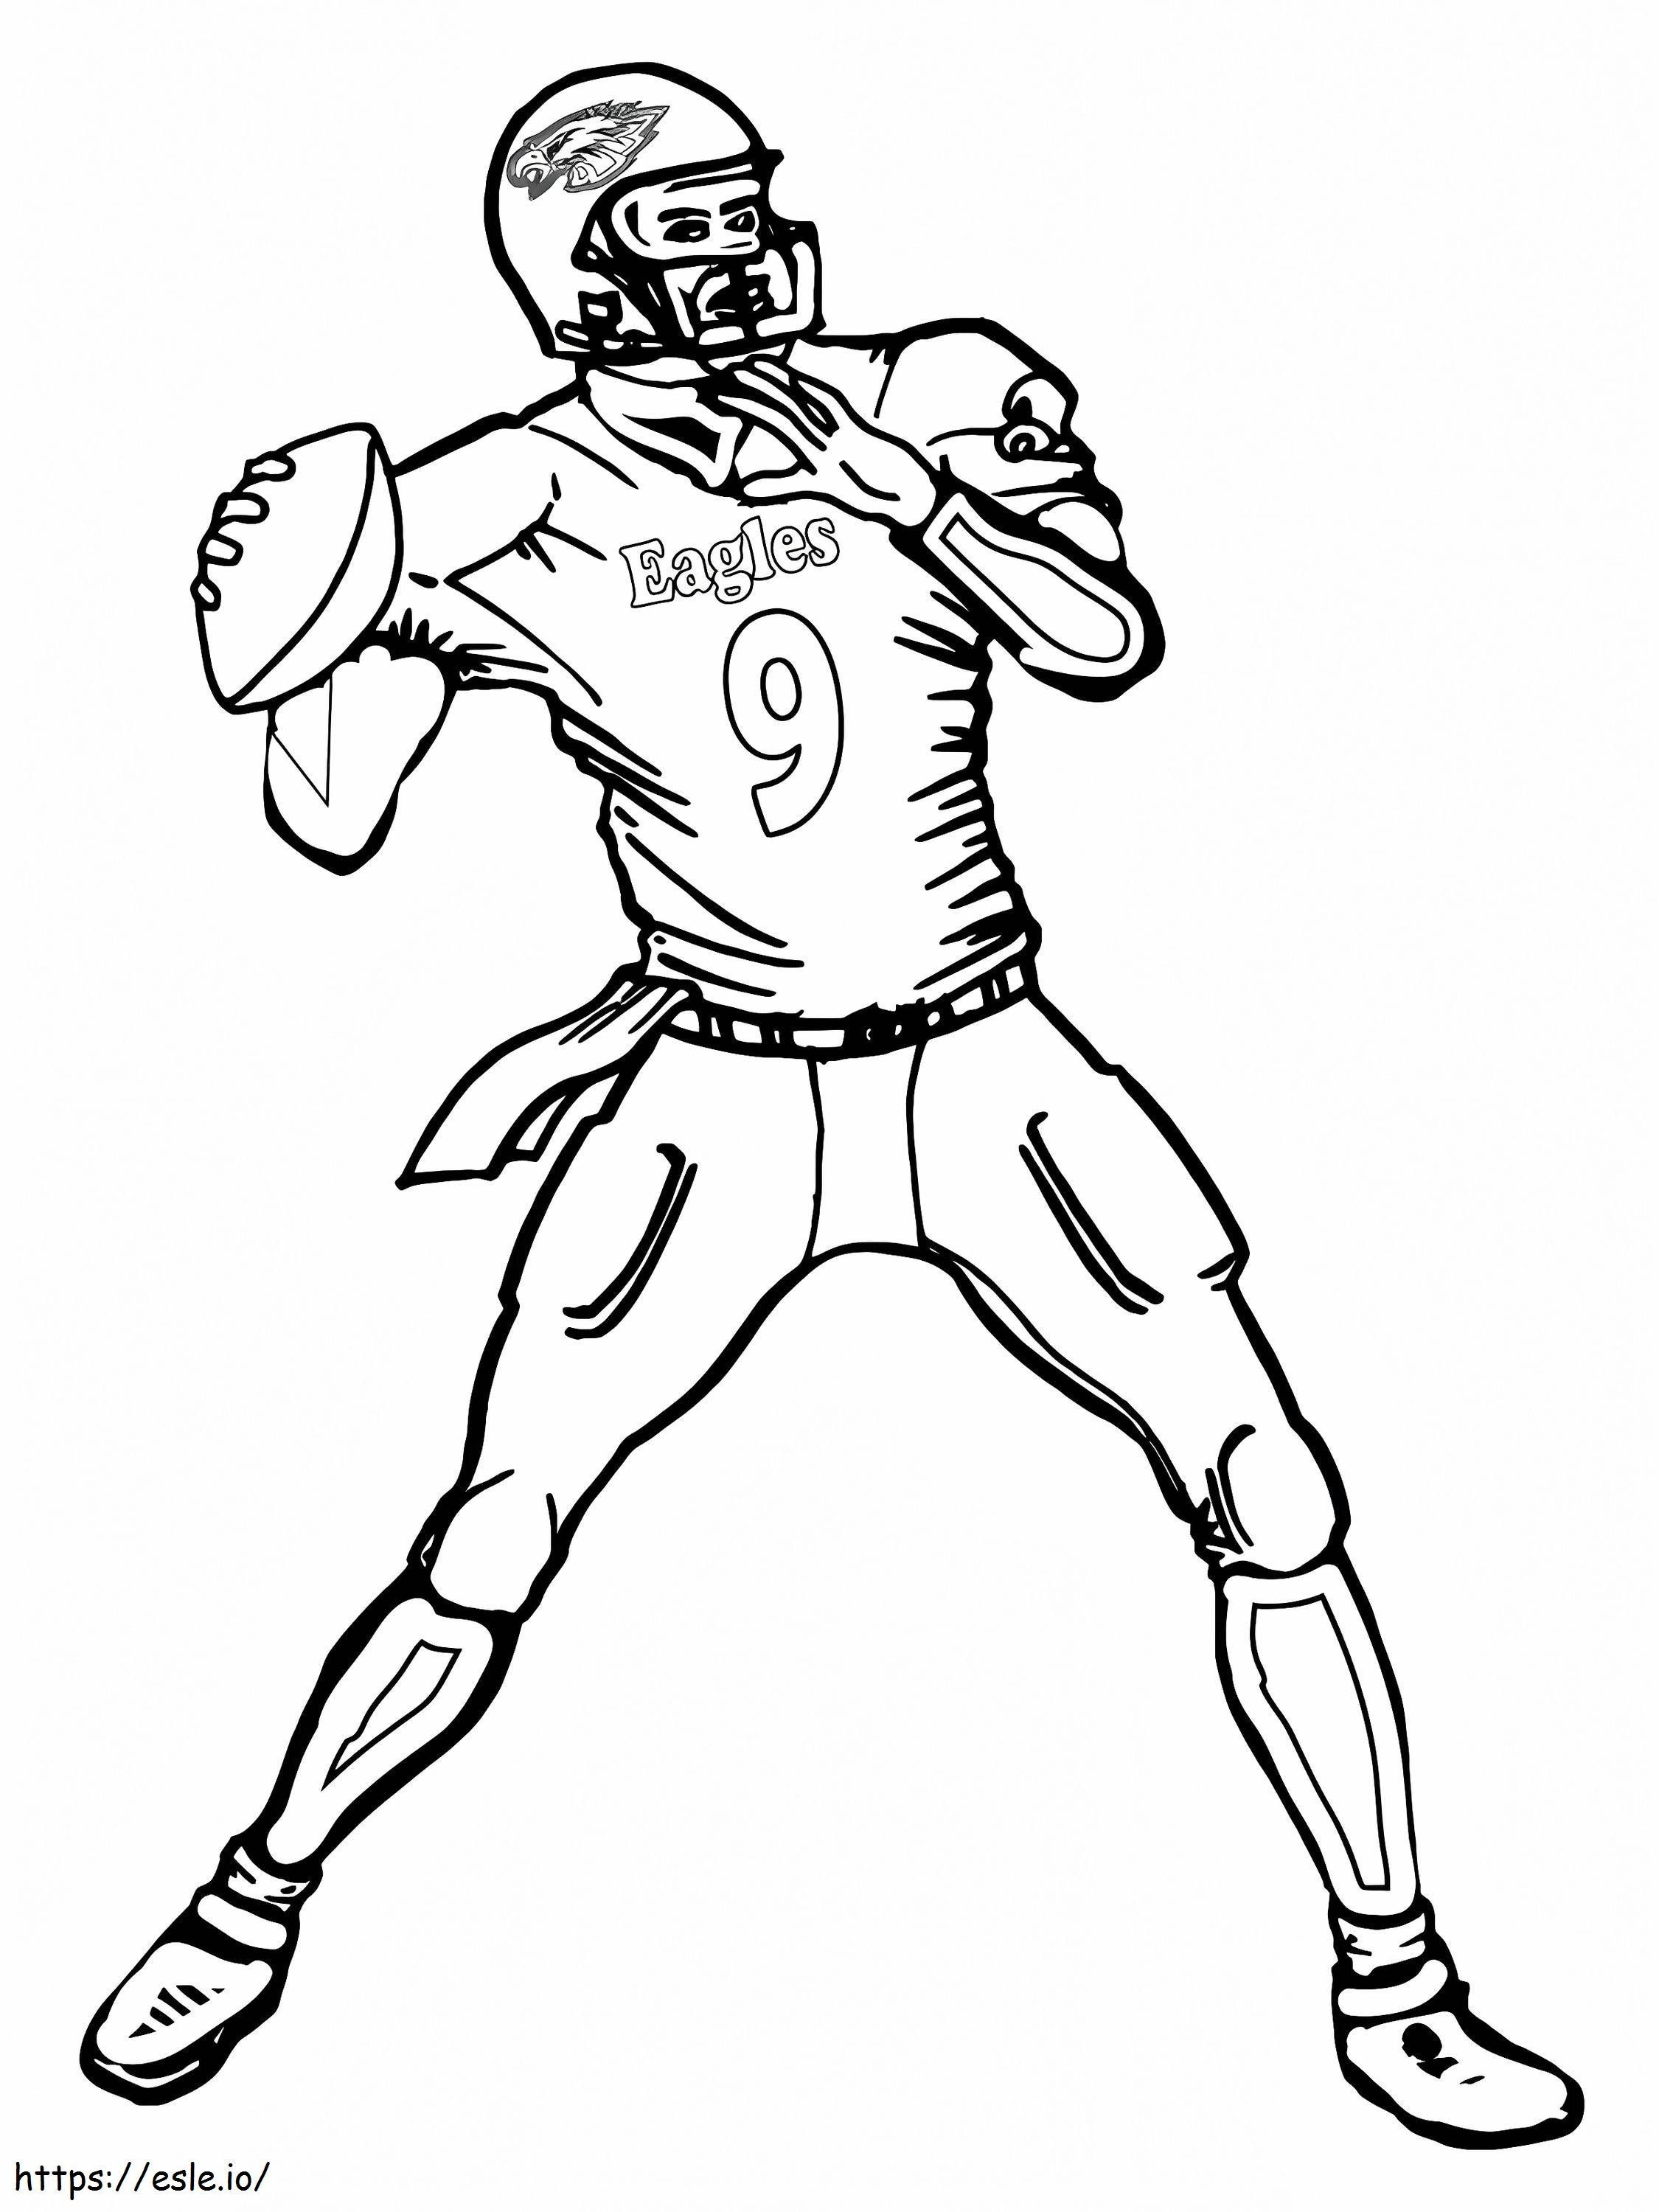 Philadelphia Eagles Player coloring page